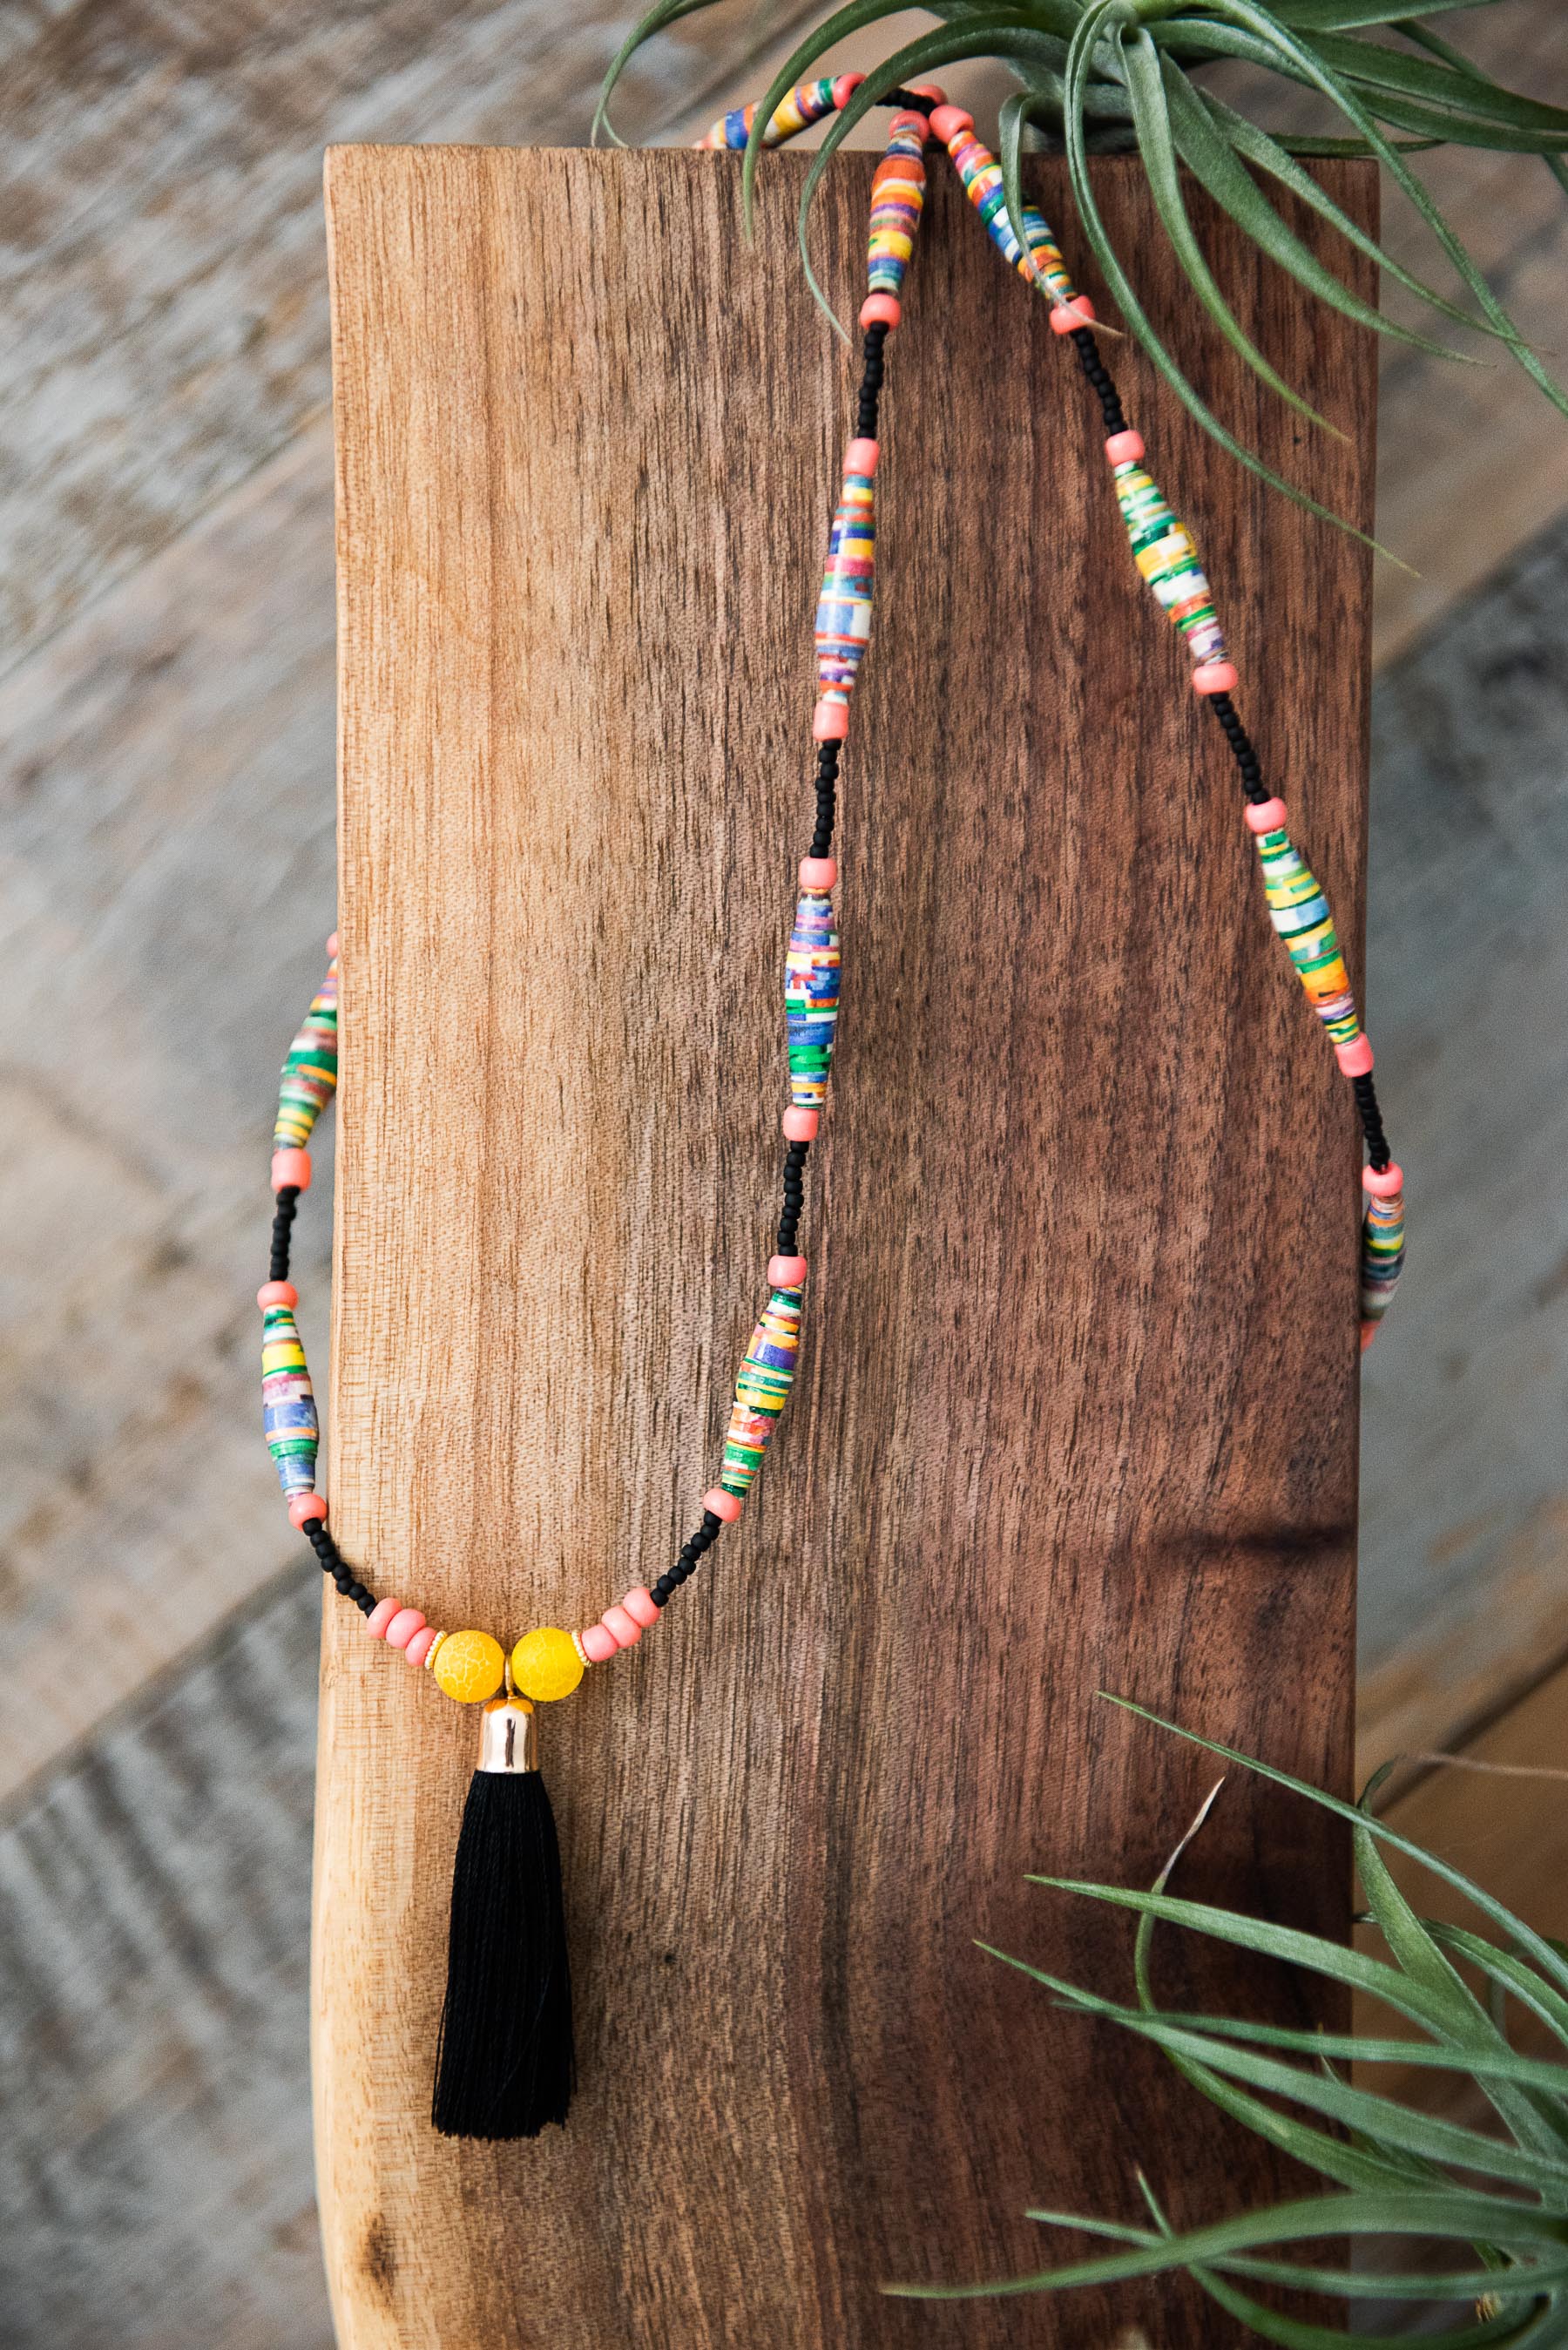 How To: Recycle Paper Into Beads!